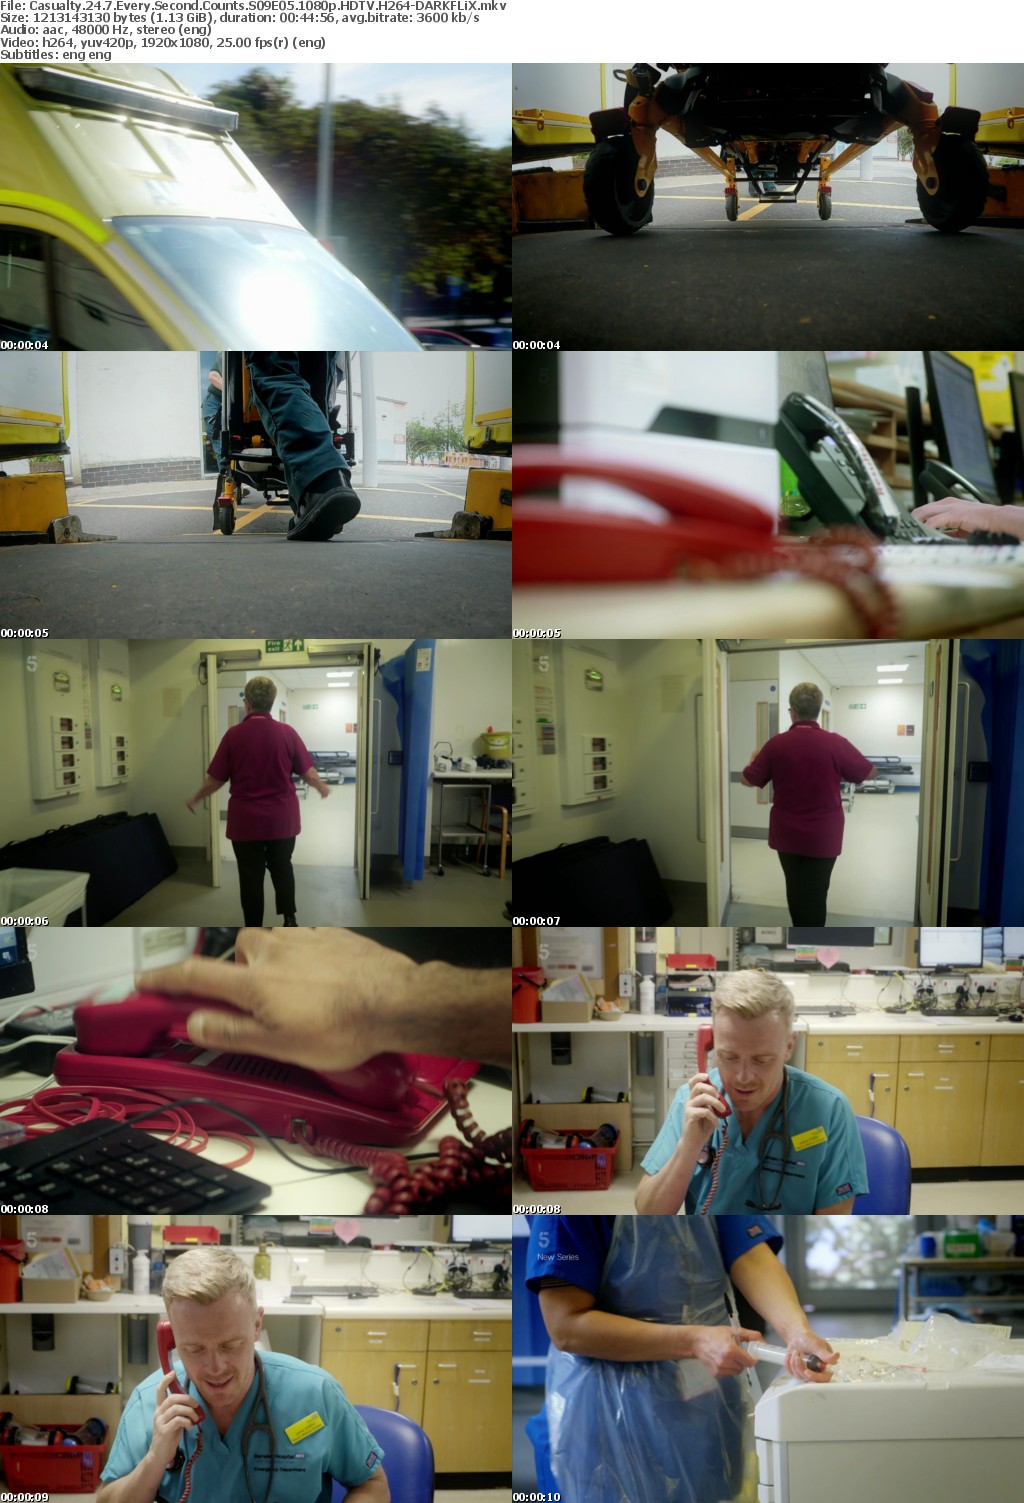 Casualty 24 7 Every Second Counts S09E05 1080p HDTV H264-DARKFLiX